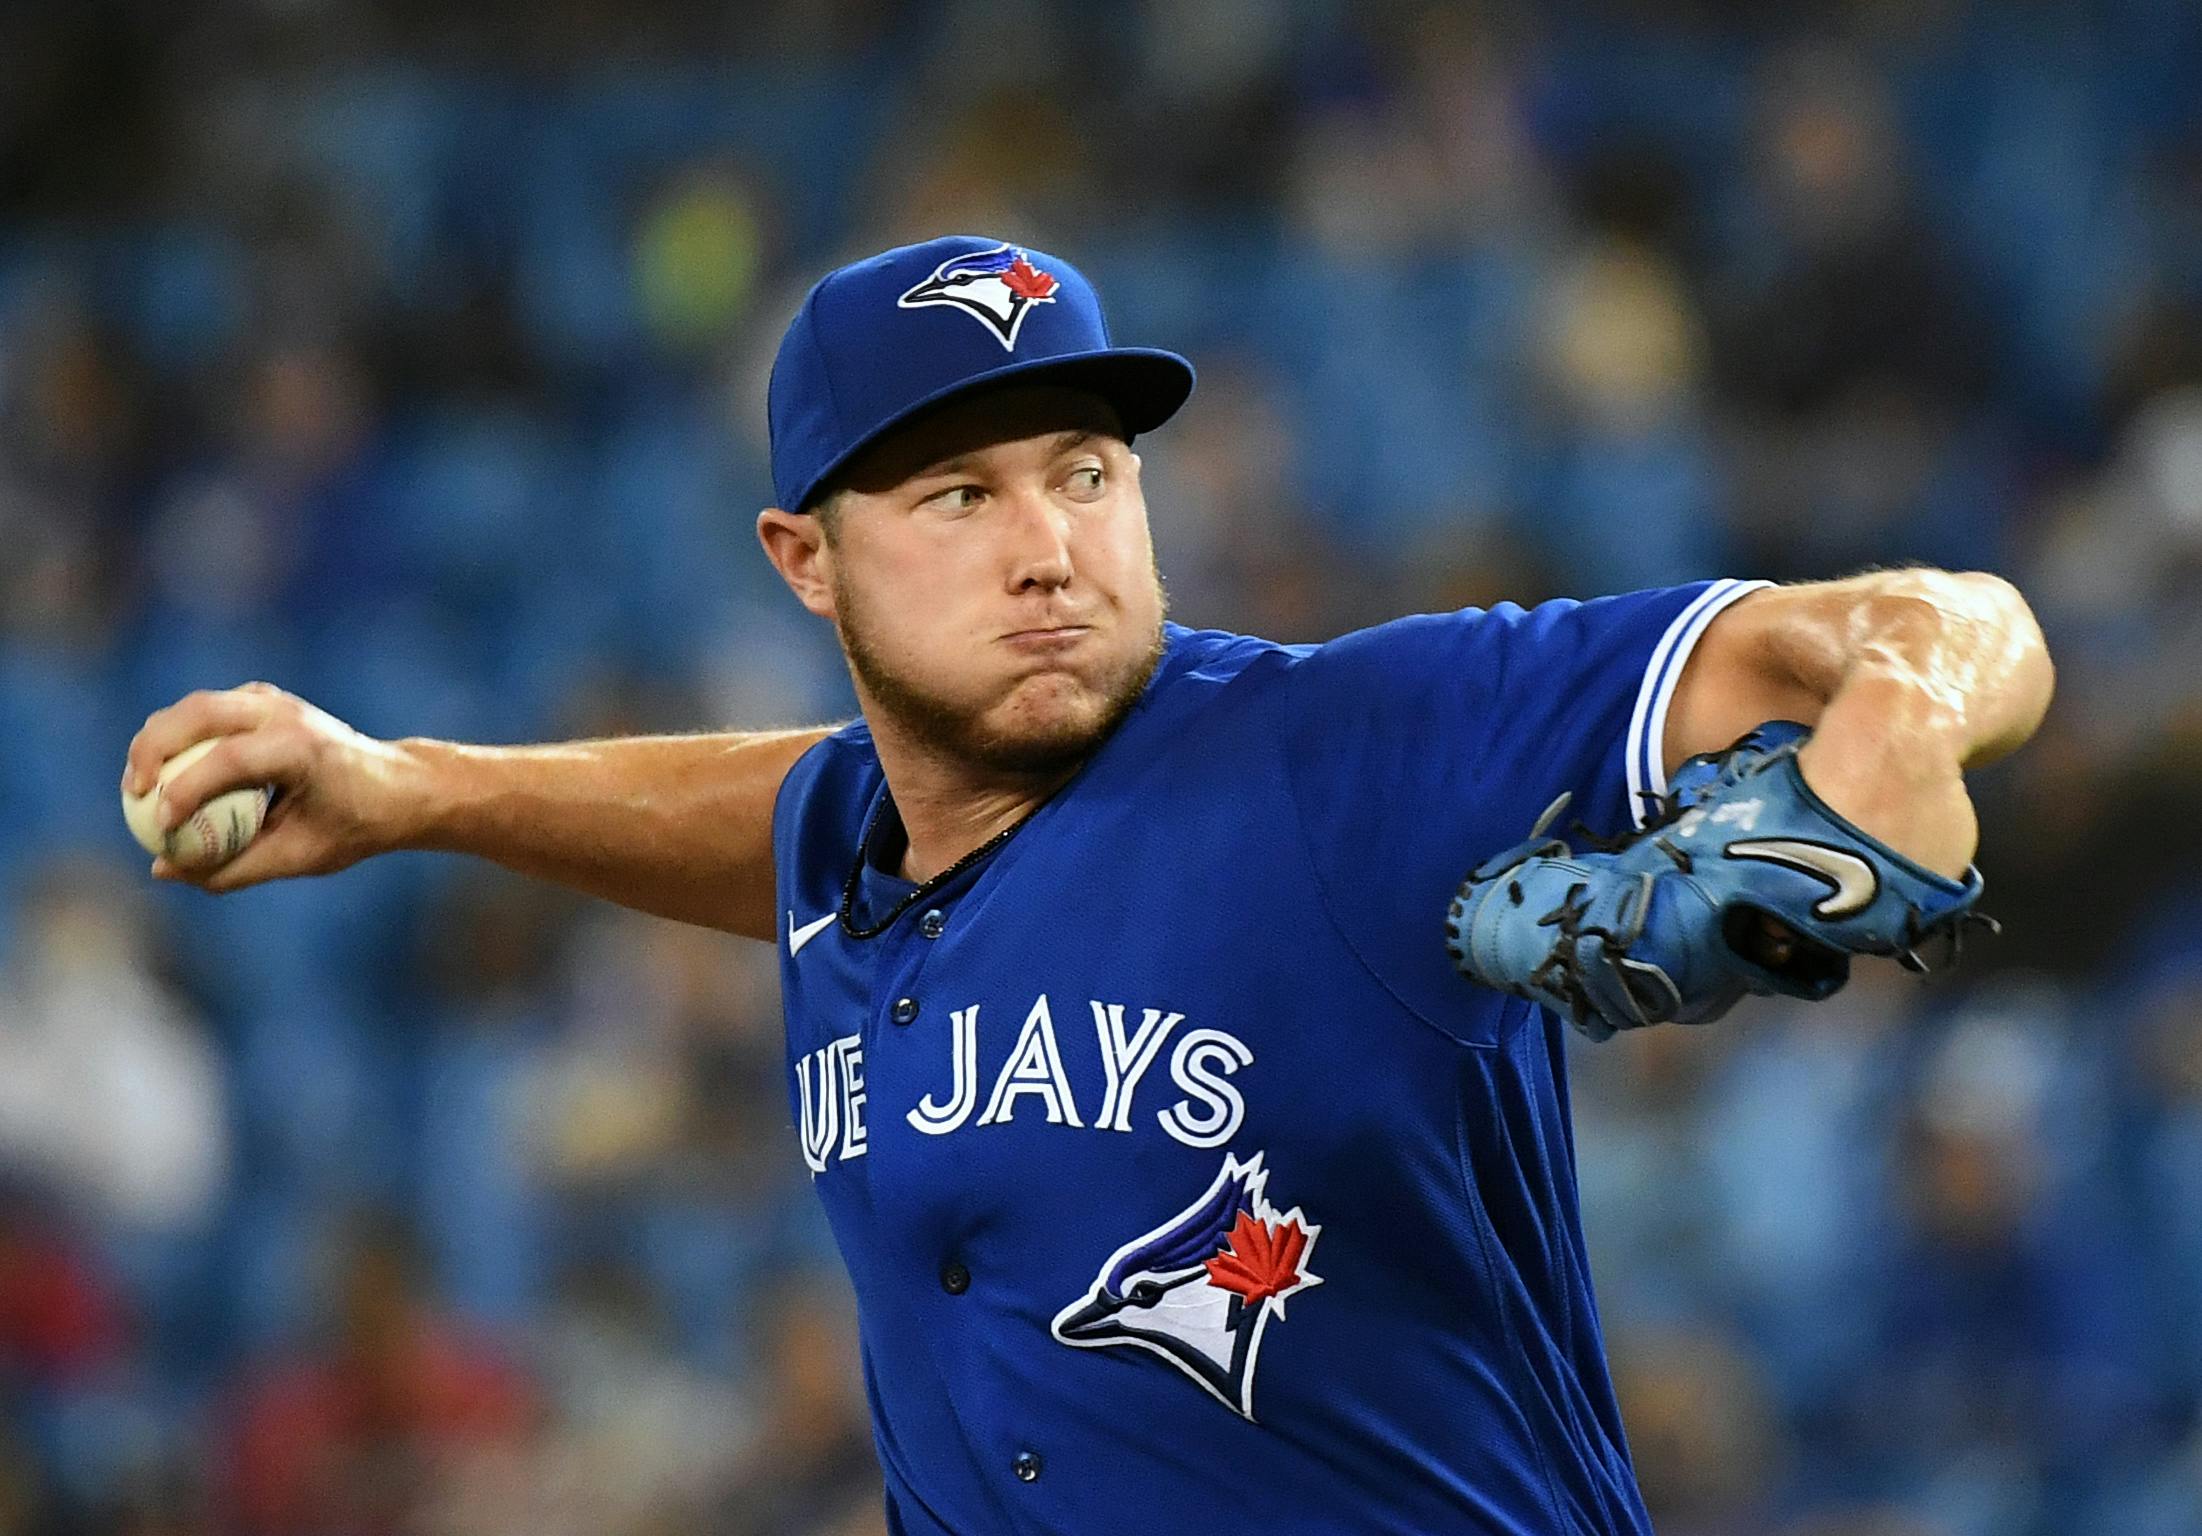 Blue Jays pitcher Gage gets his chance